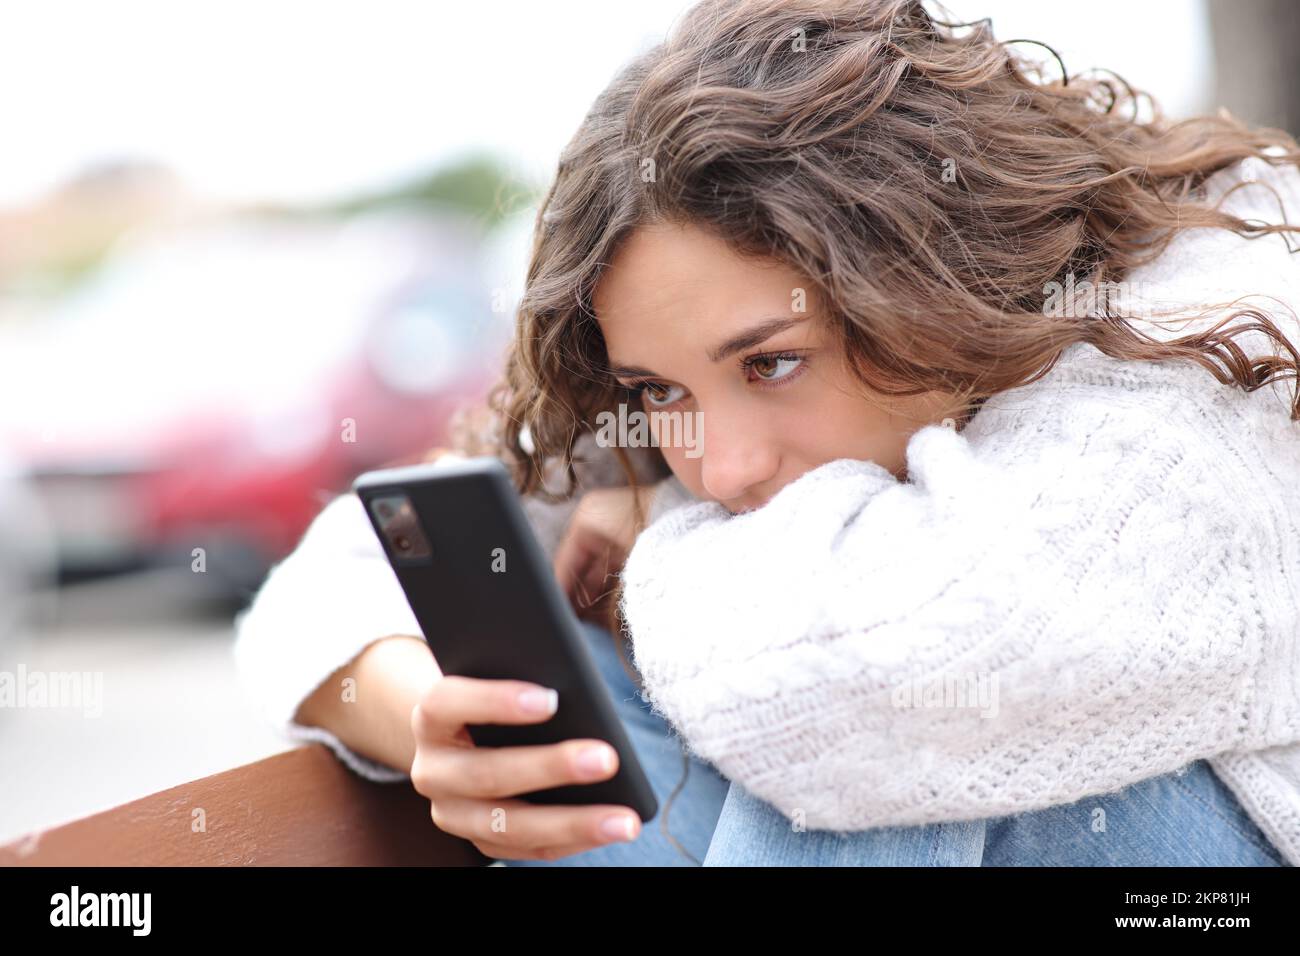 Sad woman checking smart phone sitting in a bench in the street Stock Photo